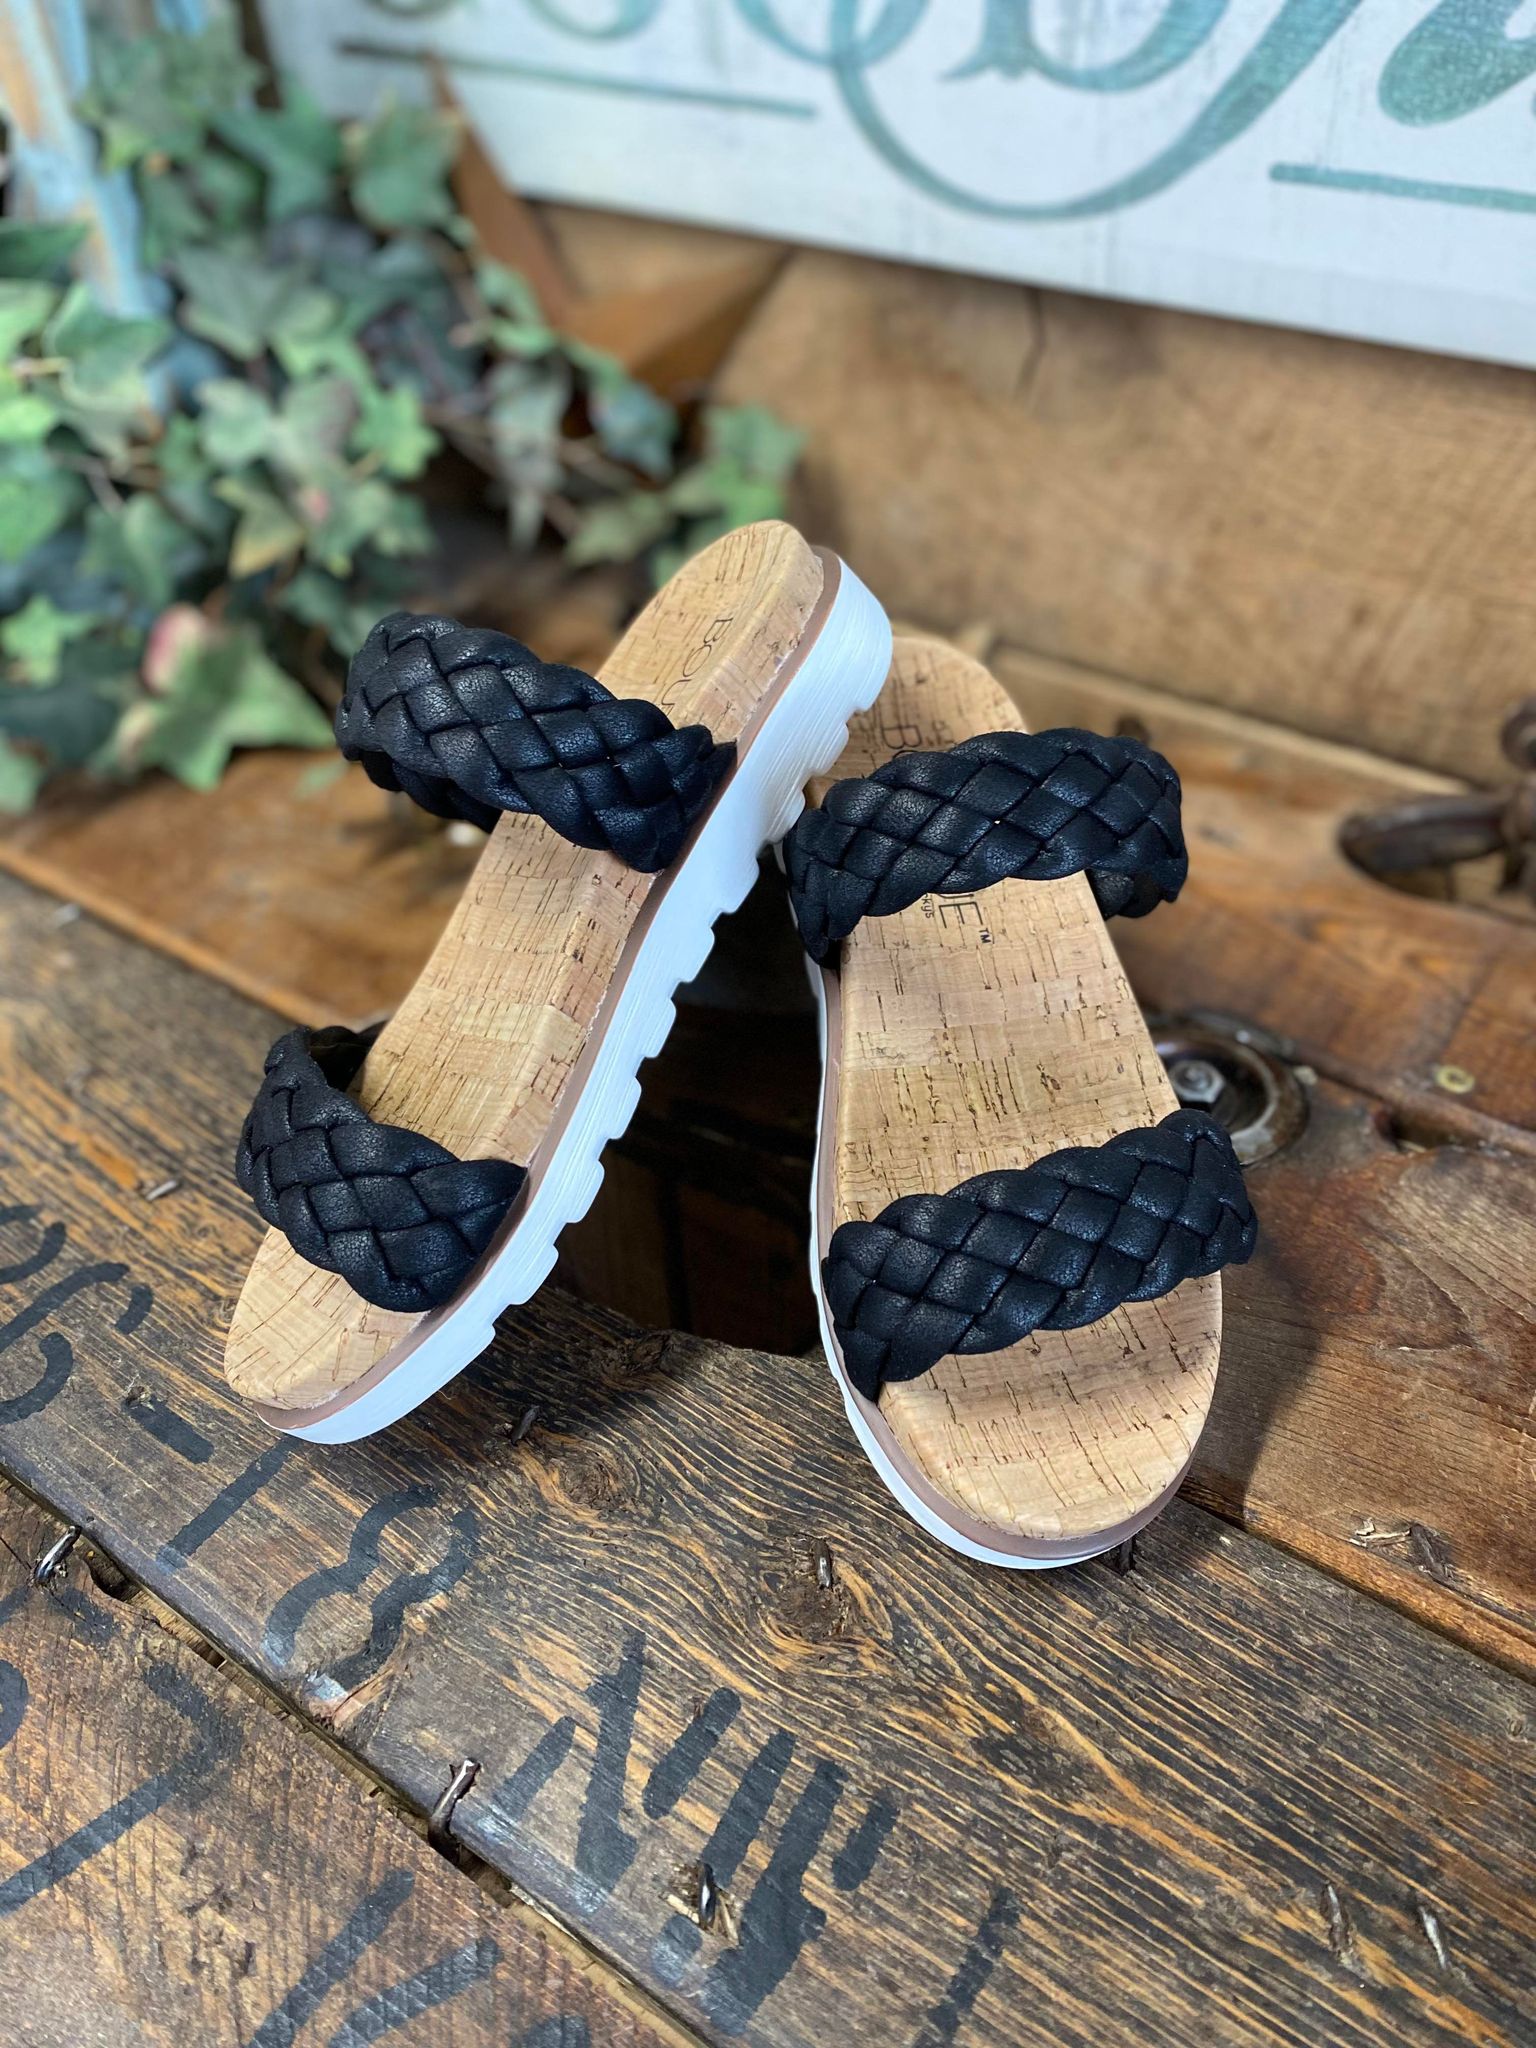 Moonlight Sandal by Boutique in Black-Women's Casual Shoes-Corkys Footwear-Lucky J Boots & More, Women's, Men's, & Kids Western Store Located in Carthage, MO